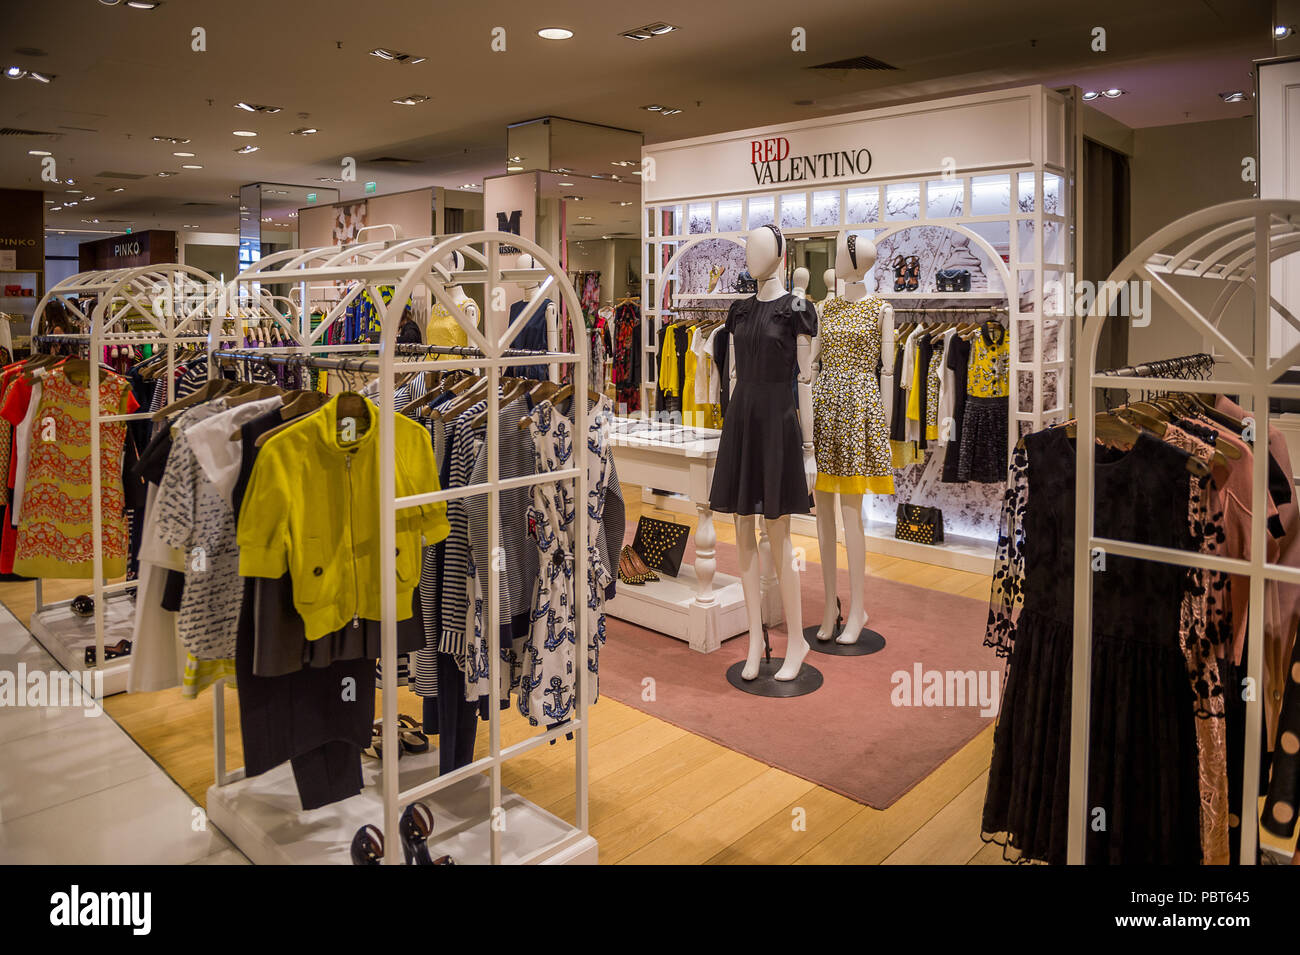 Valentino Store Business Retail Design High Resolution Stock Photography  and Images - Alamy